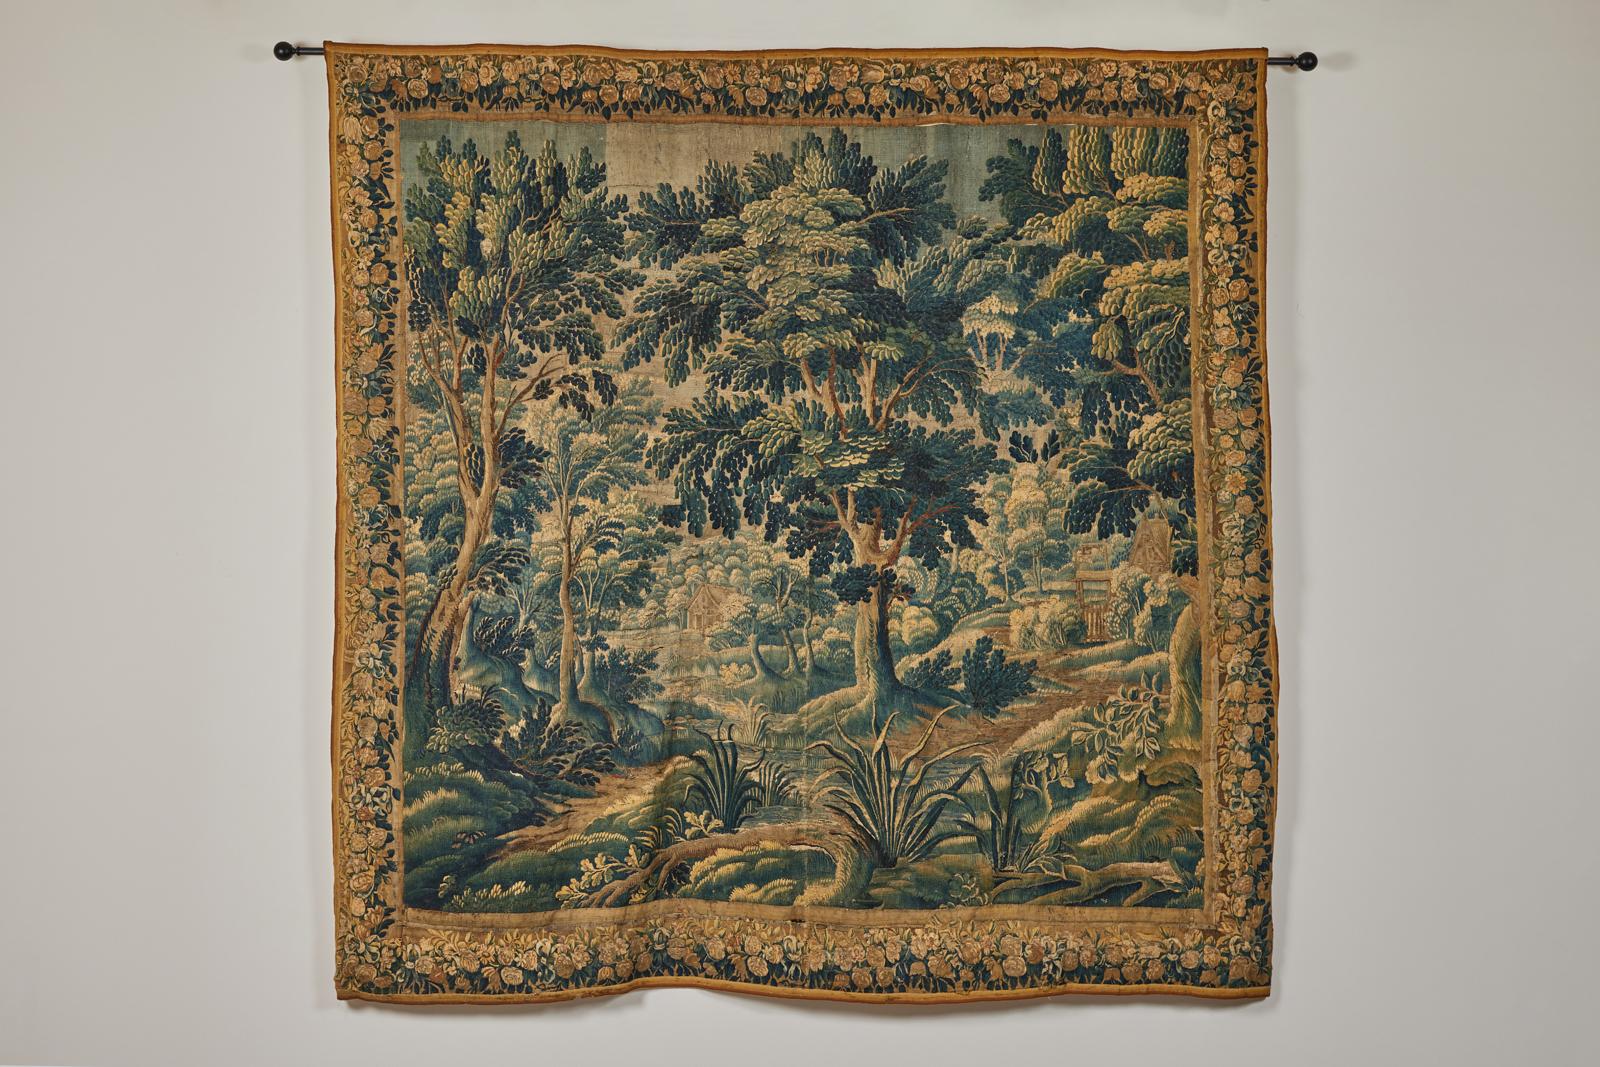 A 17th century Flemish Verdure Tapestry of a lovely landscape scene with a charming cottage next to a forest stream. Finely woven in wools of deep of blues and greens. The tapestry depicts a forest landscape full of rich plant life and verdant